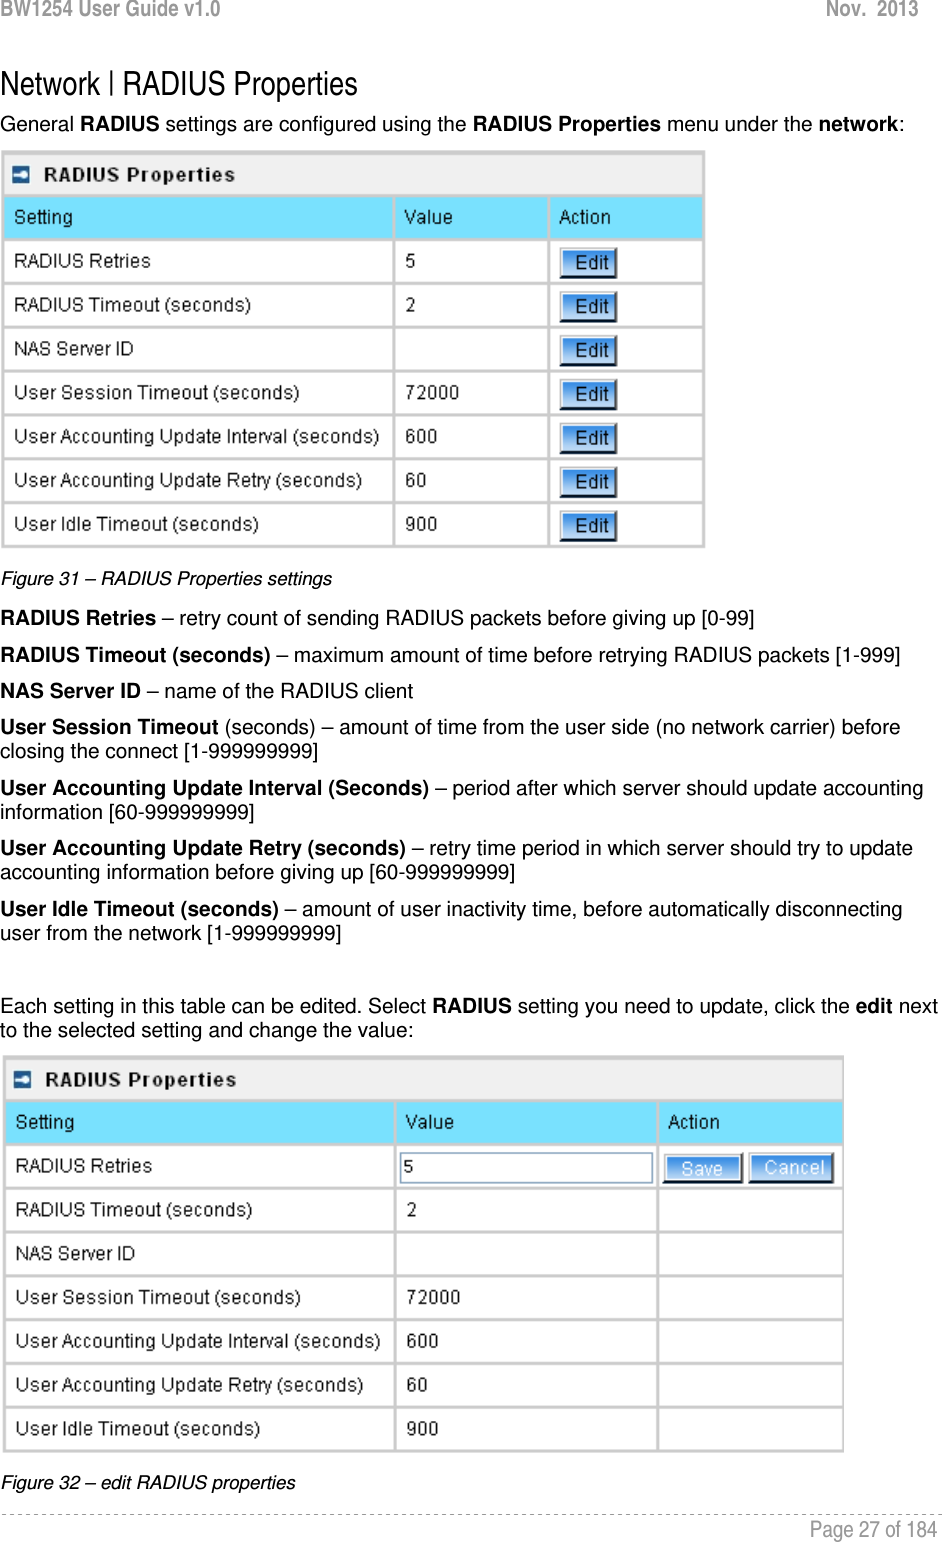 BW1254 User Guide v1.0  Nov.  2013     Page 27 of 184   Network | RADIUS Properties General RADIUS settings are configured using the RADIUS Properties menu under the network:  Figure 31 – RADIUS Properties settings RADIUS Retries – retry count of sending RADIUS packets before giving up [0-99] RADIUS Timeout (seconds) – maximum amount of time before retrying RADIUS packets [1-999] NAS Server ID – name of the RADIUS client User Session Timeout (seconds) – amount of time from the user side (no network carrier) before closing the connect [1-999999999] User Accounting Update Interval (Seconds) – period after which server should update accounting information [60-999999999] User Accounting Update Retry (seconds) – retry time period in which server should try to update accounting information before giving up [60-999999999] User Idle Timeout (seconds) – amount of user inactivity time, before automatically disconnecting user from the network [1-999999999]  Each setting in this table can be edited. Select RADIUS setting you need to update, click the edit next to the selected setting and change the value:  Figure 32 – edit RADIUS properties 